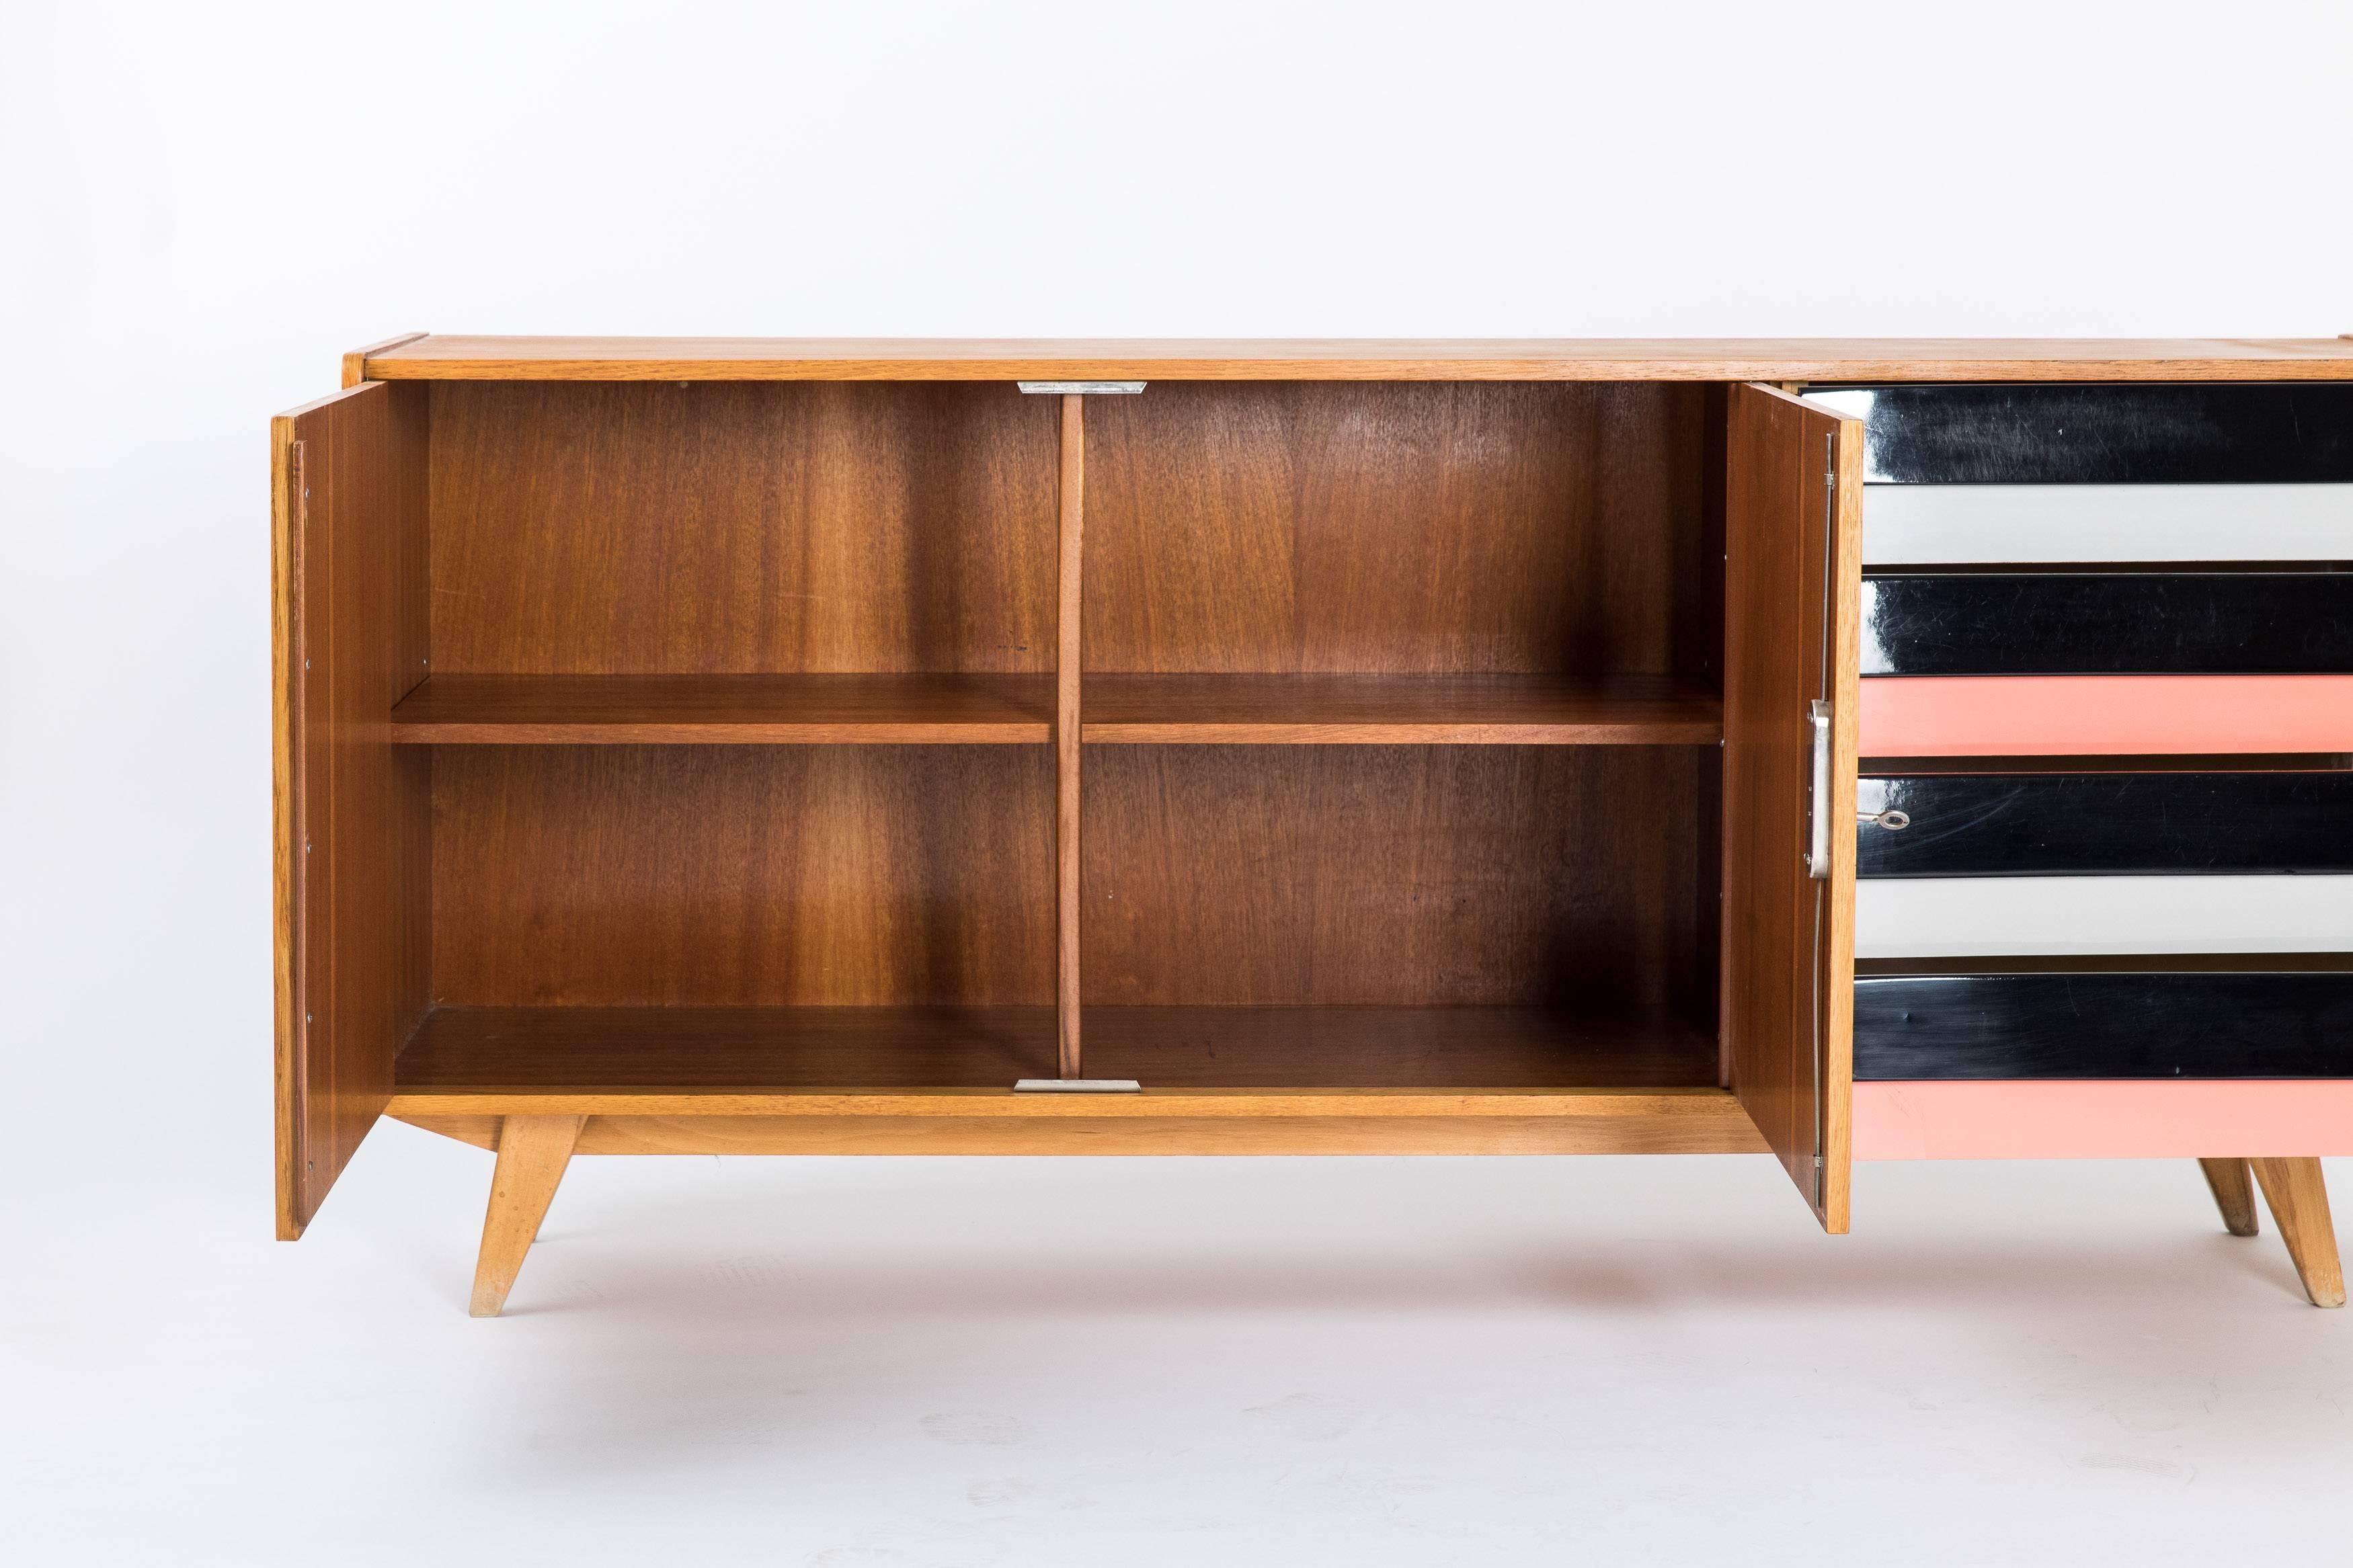 Eye-catching sideboard from the hands of Czech designer Jiri Jiroutek, Type U-460 from the stunning U-450 series designed in the late 1950s featuring the 1958 Brusel World Expo. With two revolving doors and four drawers in pink, black and off-white